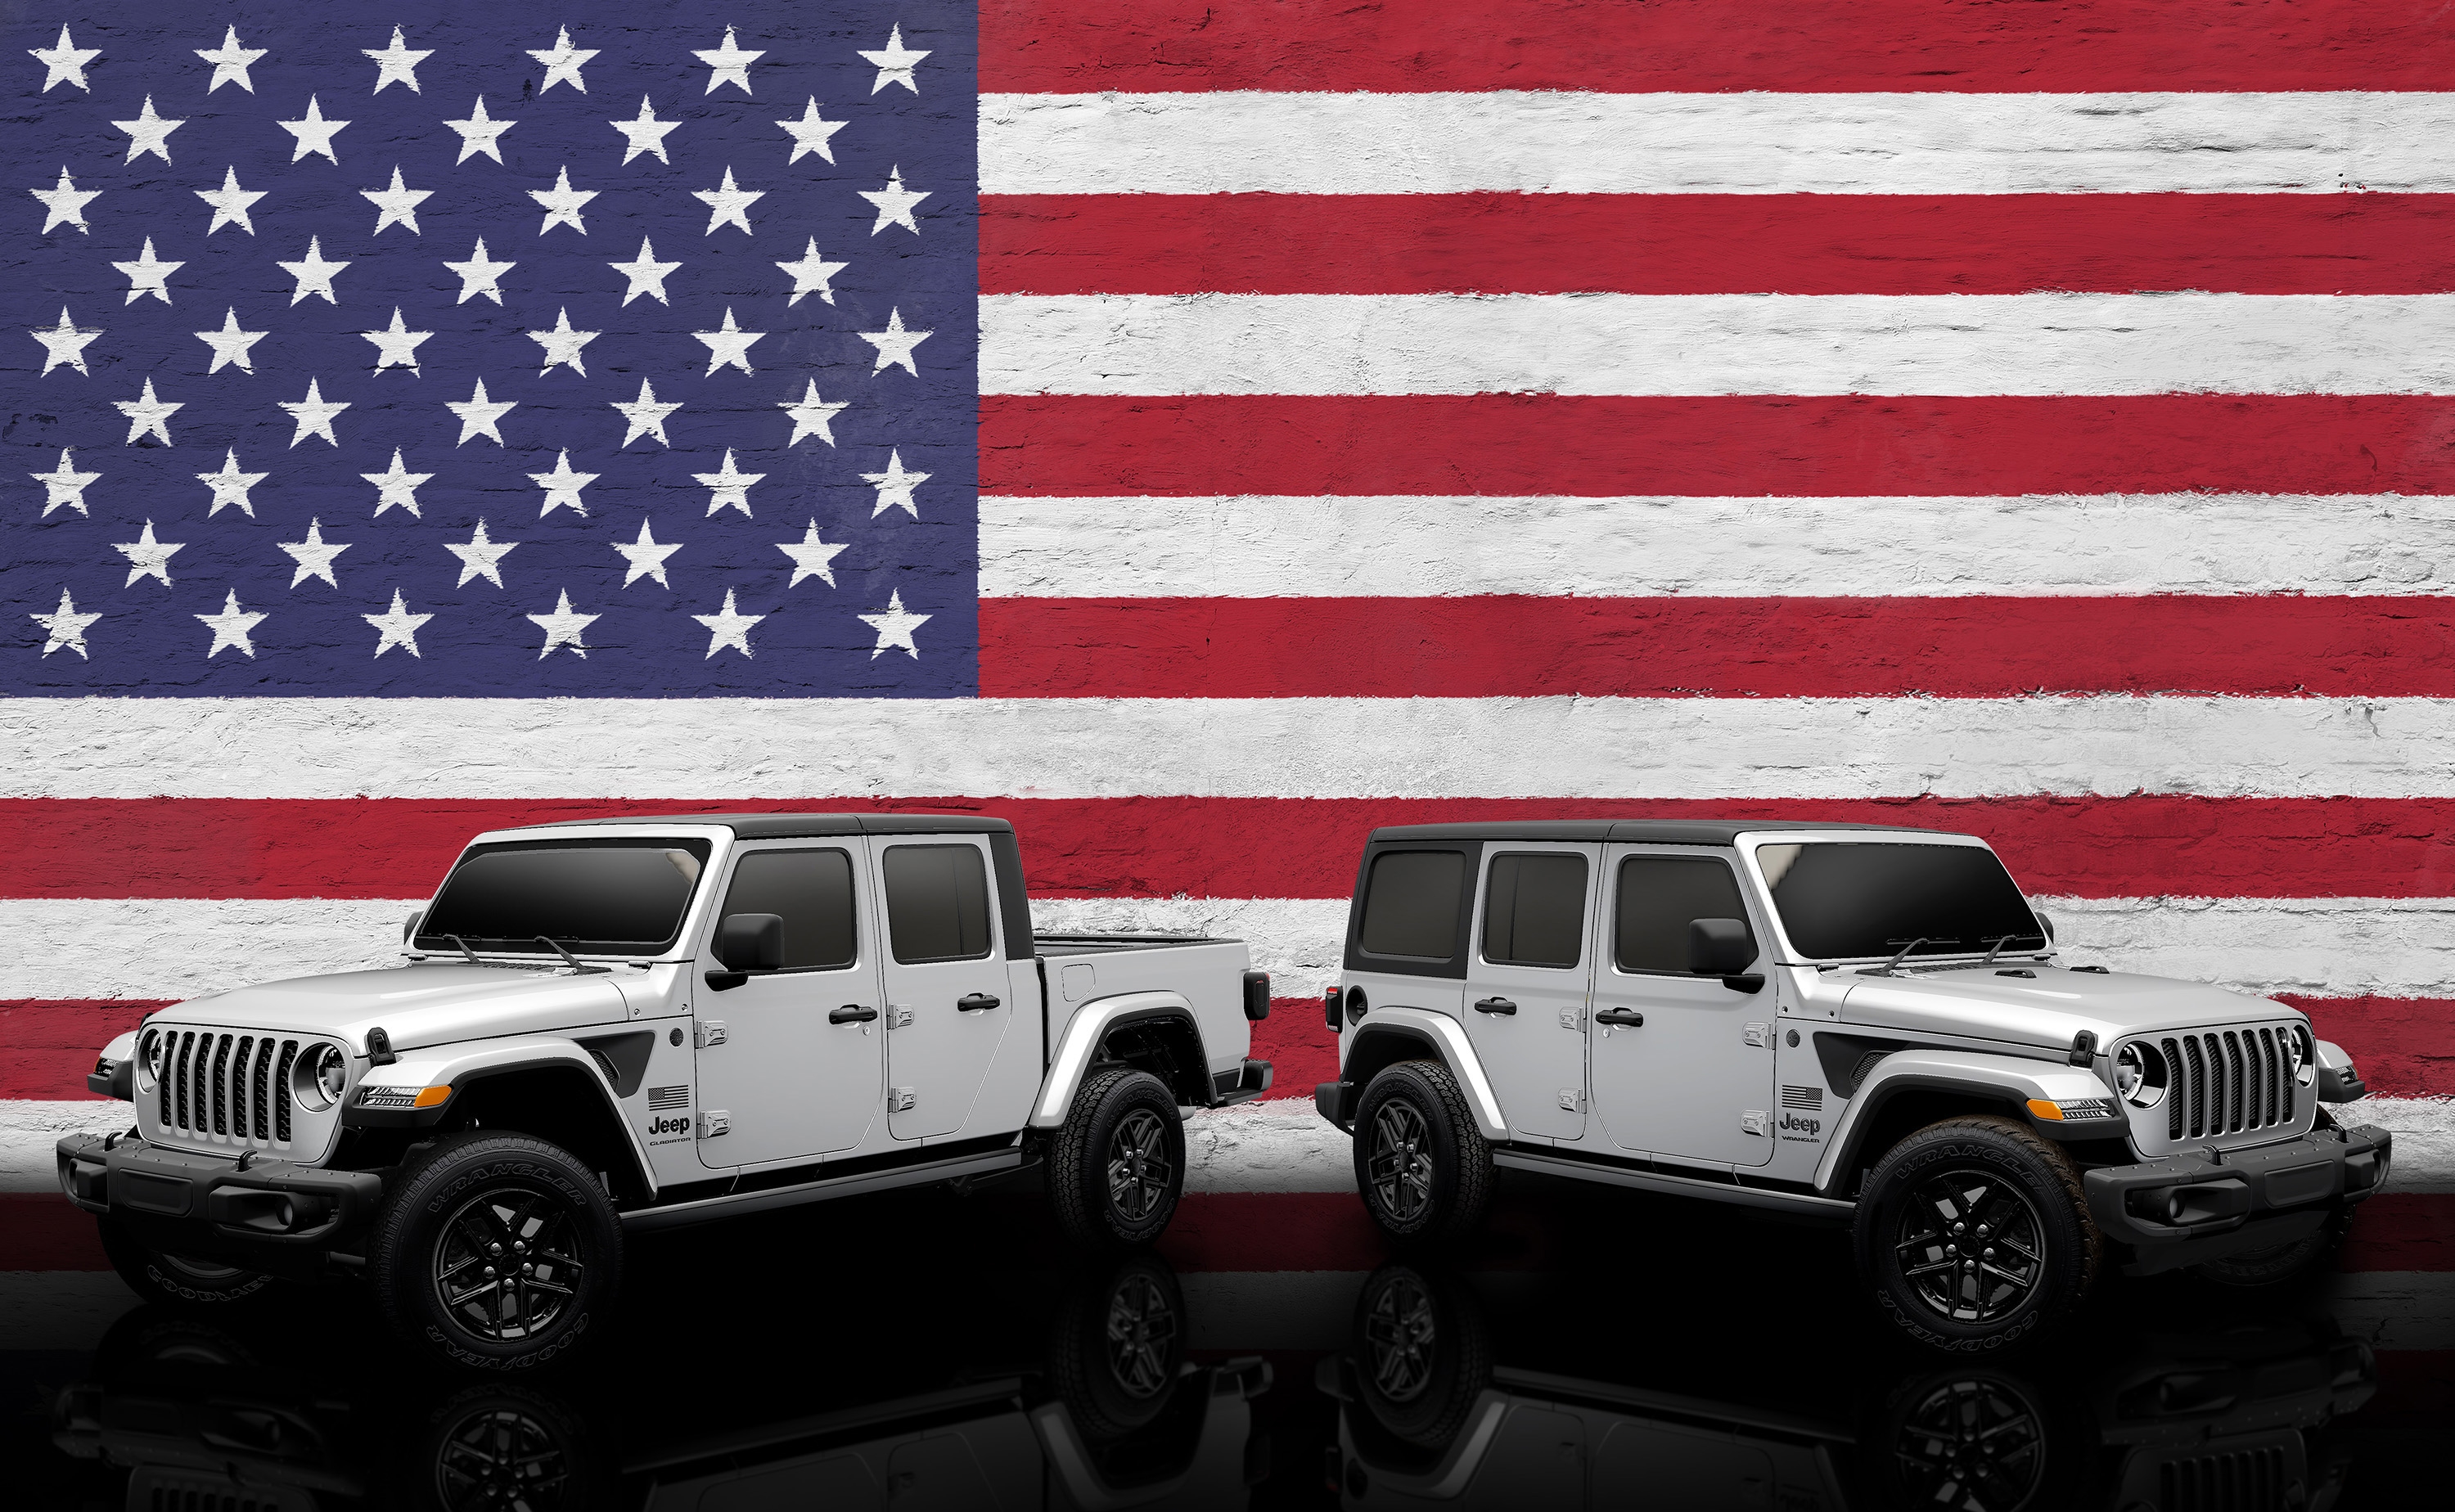 Wagoneer S EV 🇺🇸 Pride and Honor – Jeep Recognized for 22nd Consecutive Year as America’s Most Patriotic Brand; Renews Long-standing Partnership With USO d7d8fe6e-bb7c-40e8-baab-7361b4a24add-jpe